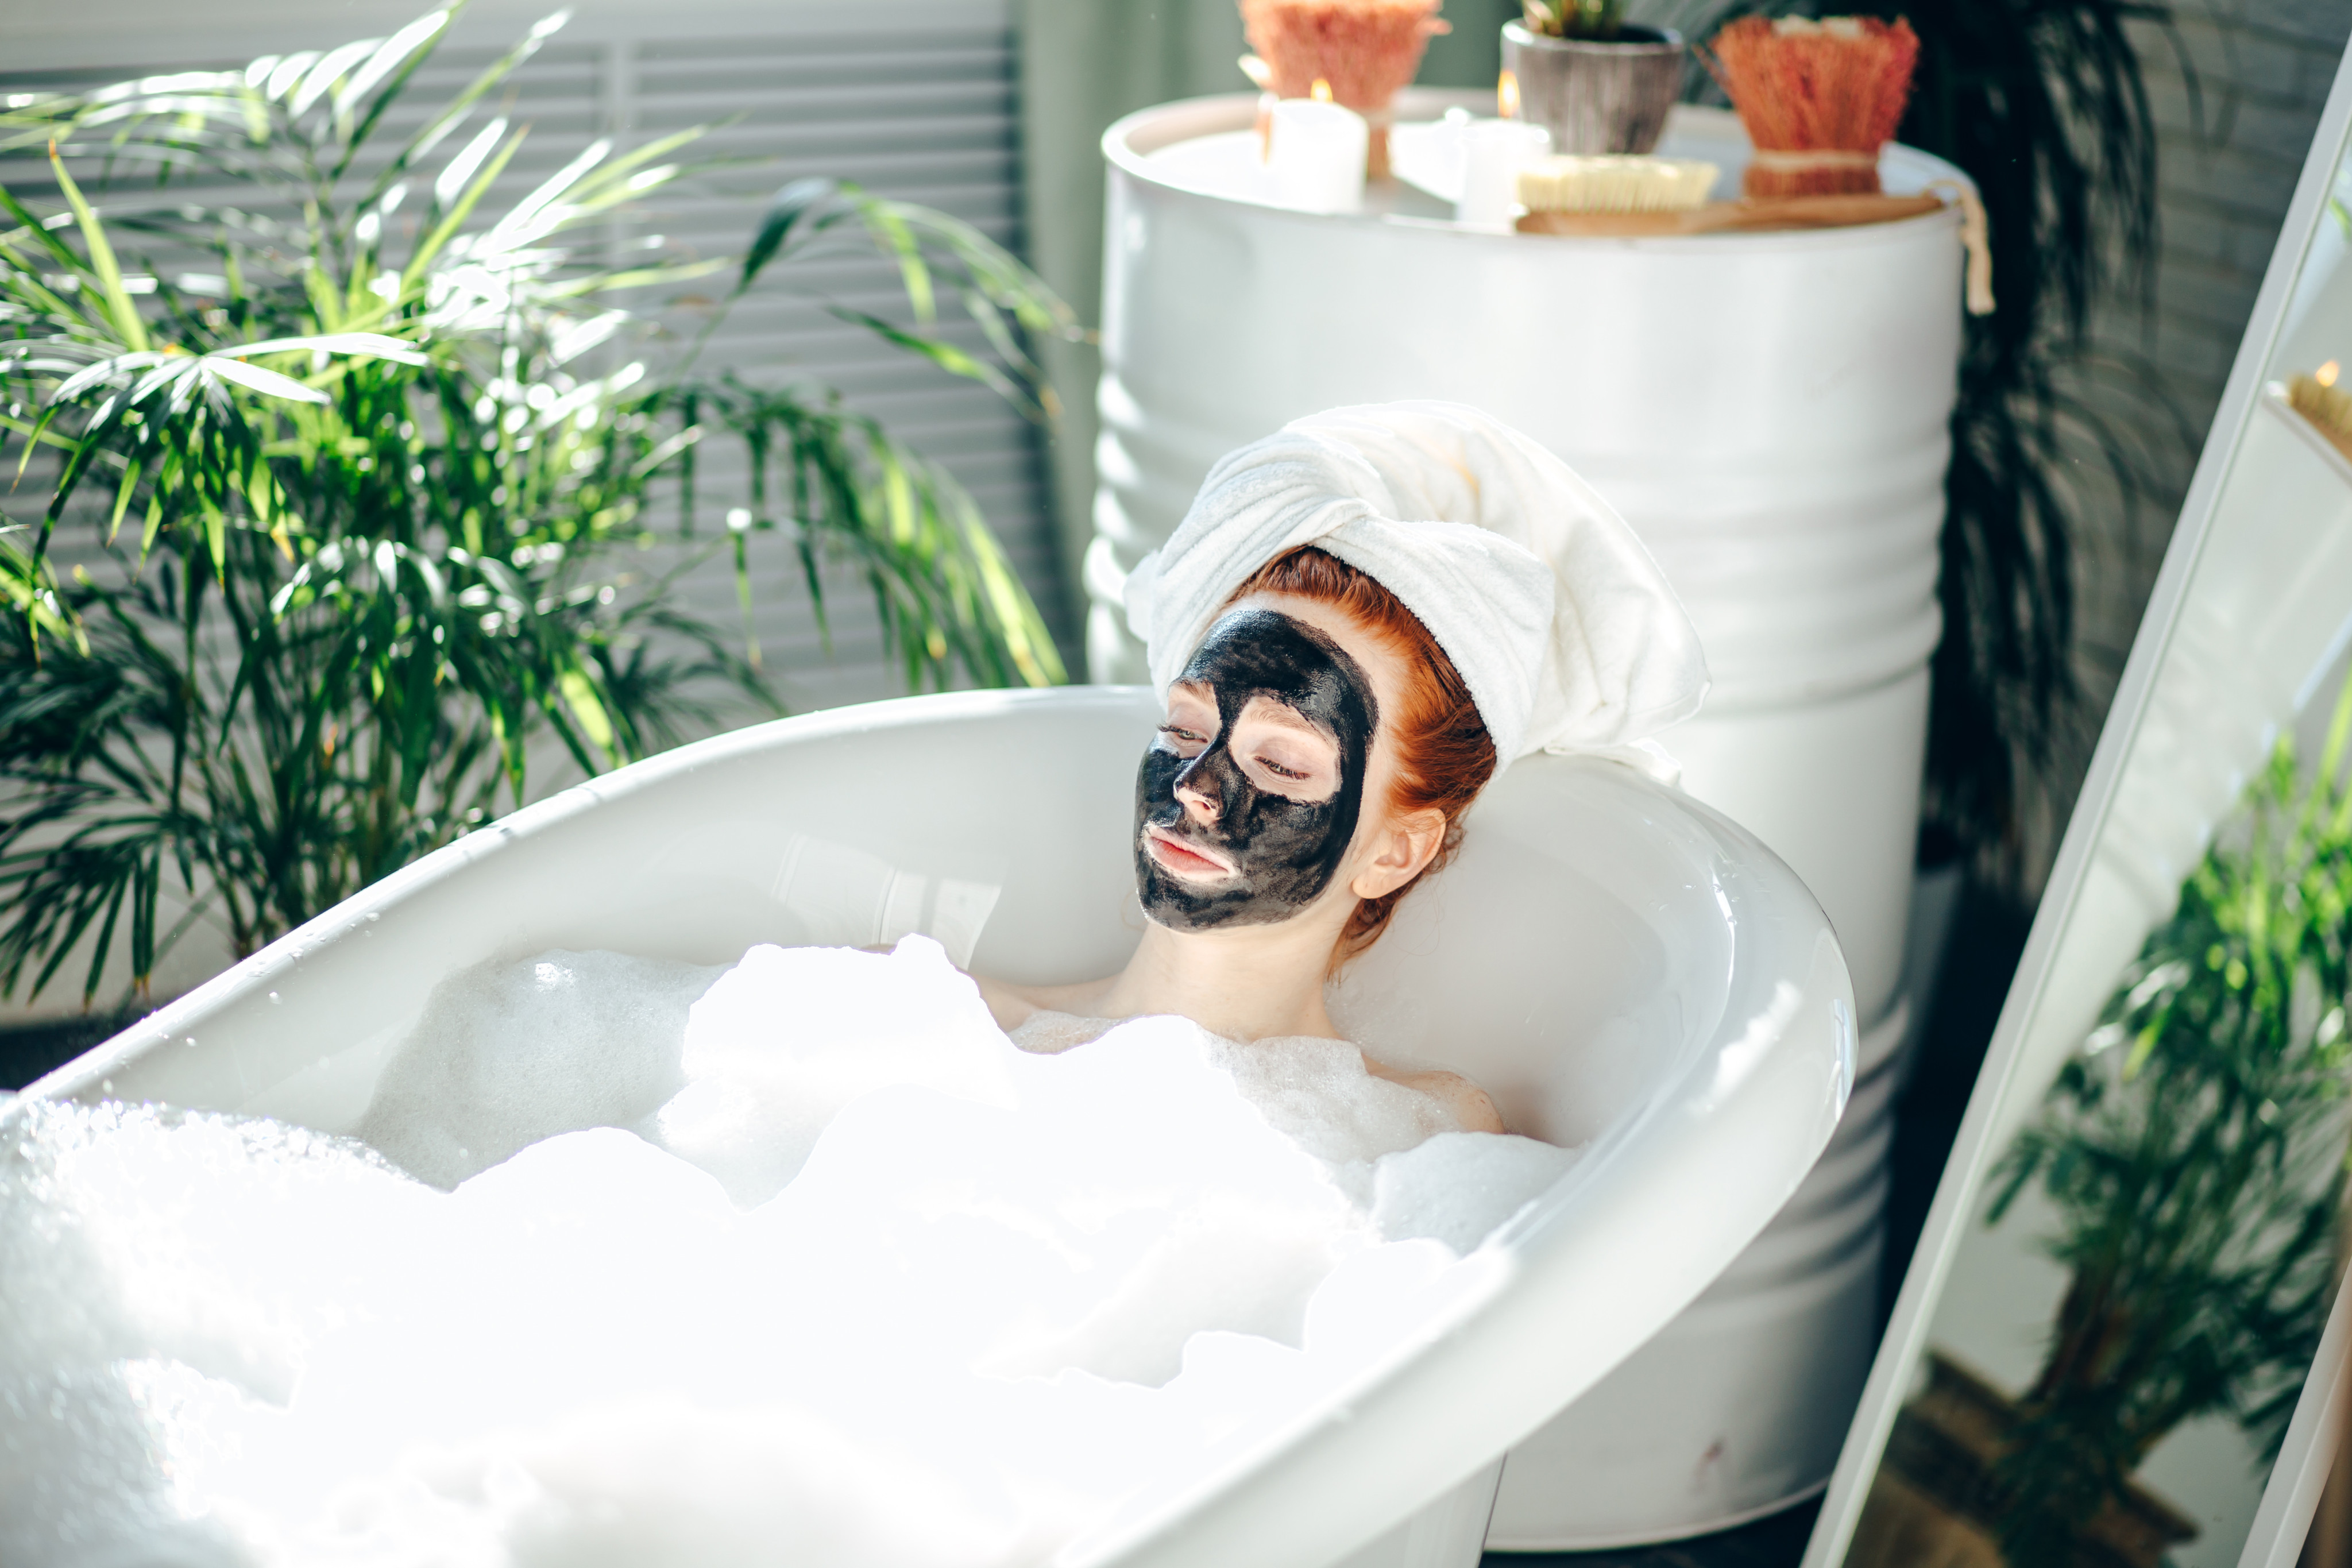 The “everything shower” self-care trend includes taking long baths, moisturising, exfoliating and more. Experts talk about the benefits of such rituals, including how they can help us relax in a post-pandemic world. Photo: Shutterstock  